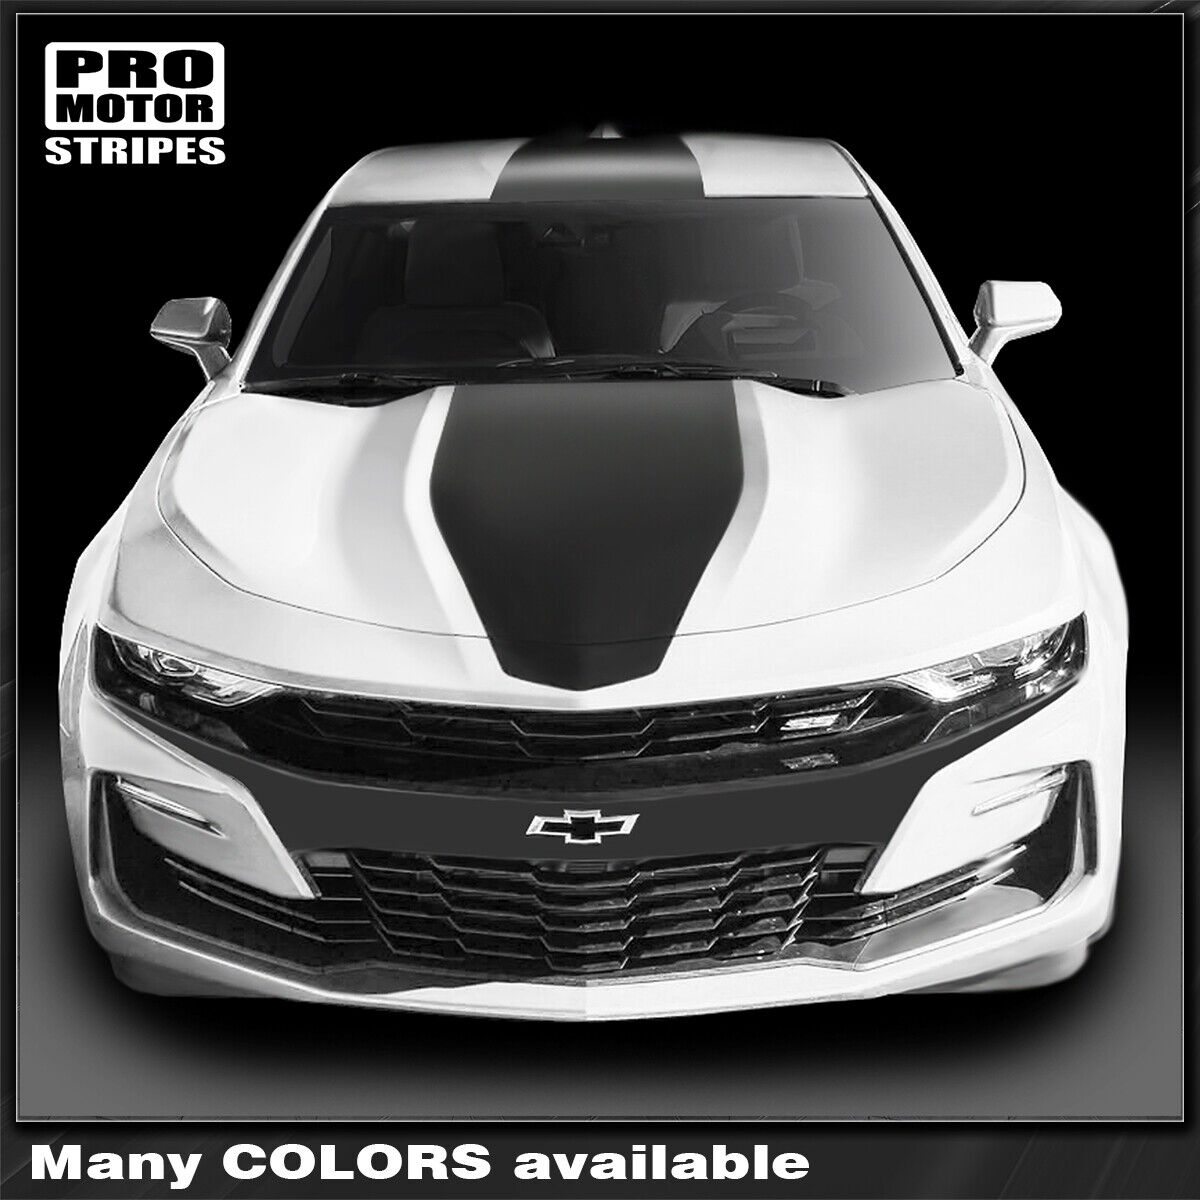 Chevrolet Camaro 2019-2023 Over The Top Stripes Hood, Roof & Rear (Choose Color)